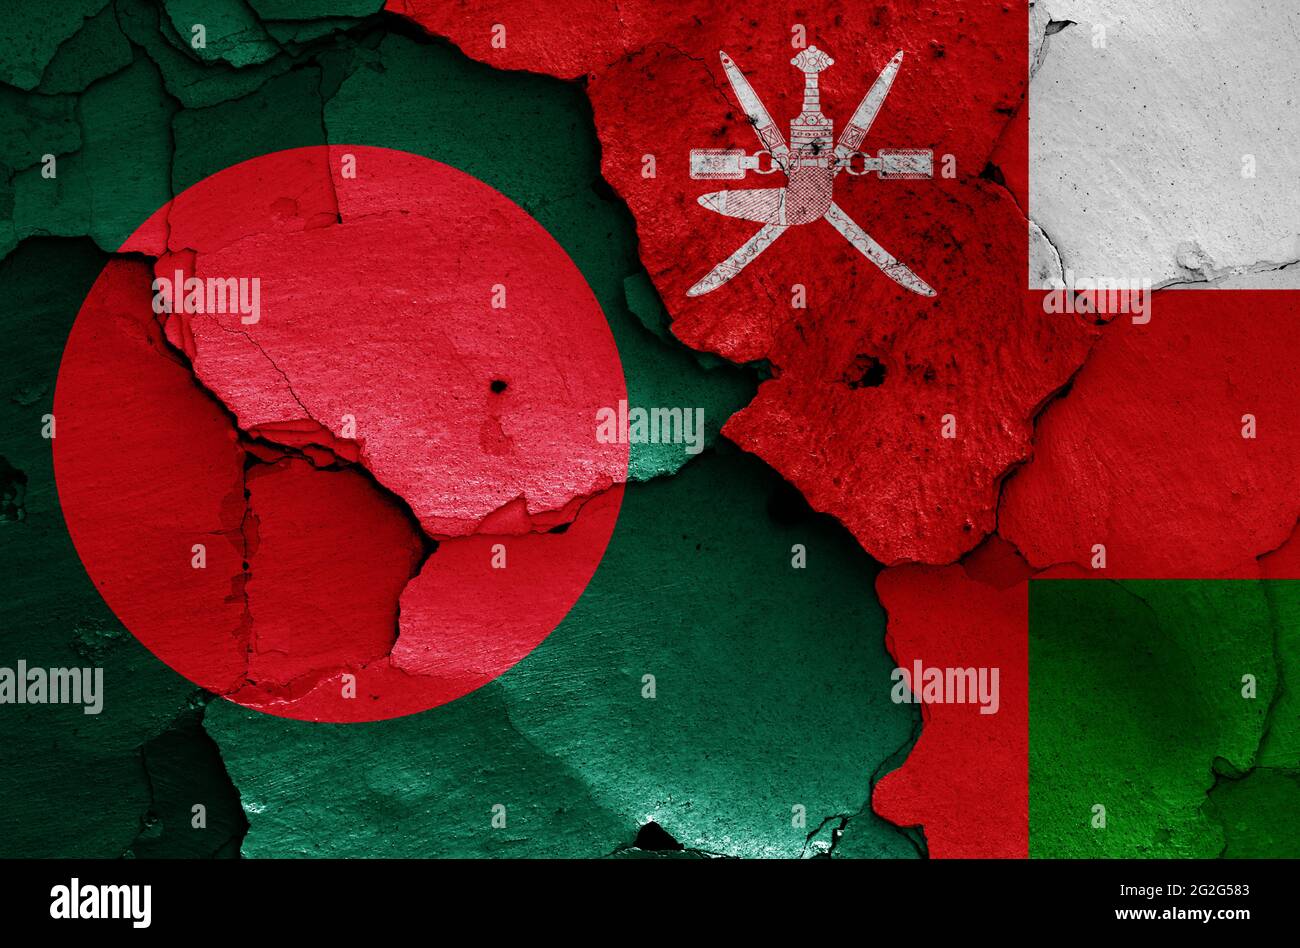 flags of Bangladesh and Oman painted on cracked wall Stock Photo